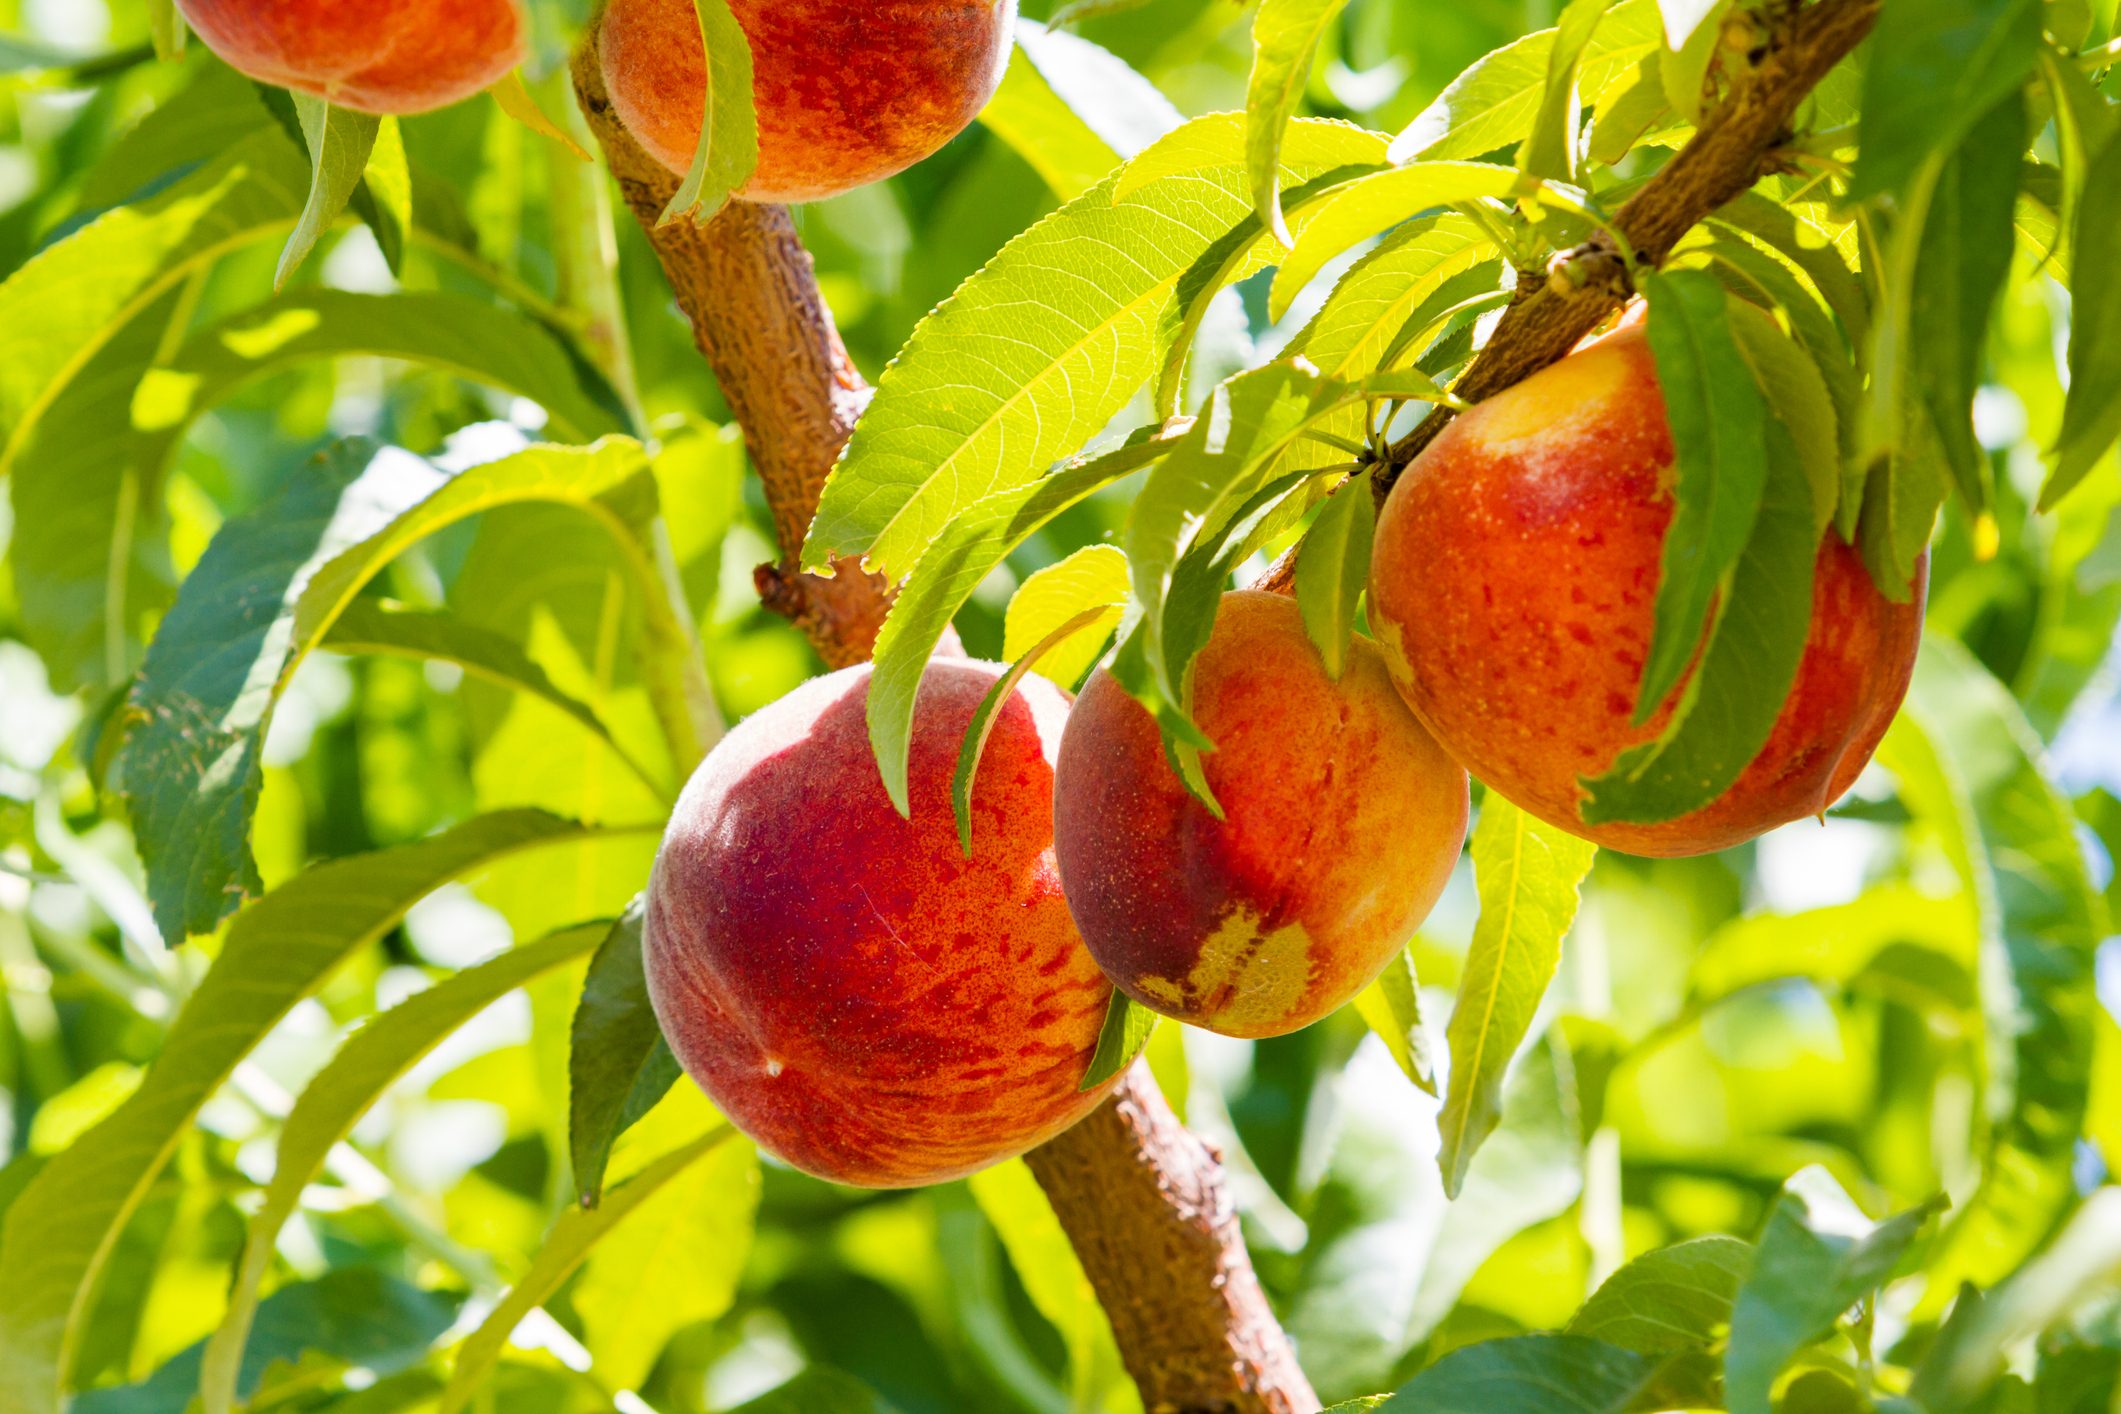 A Ranking of Different Peaches You Find at the Market